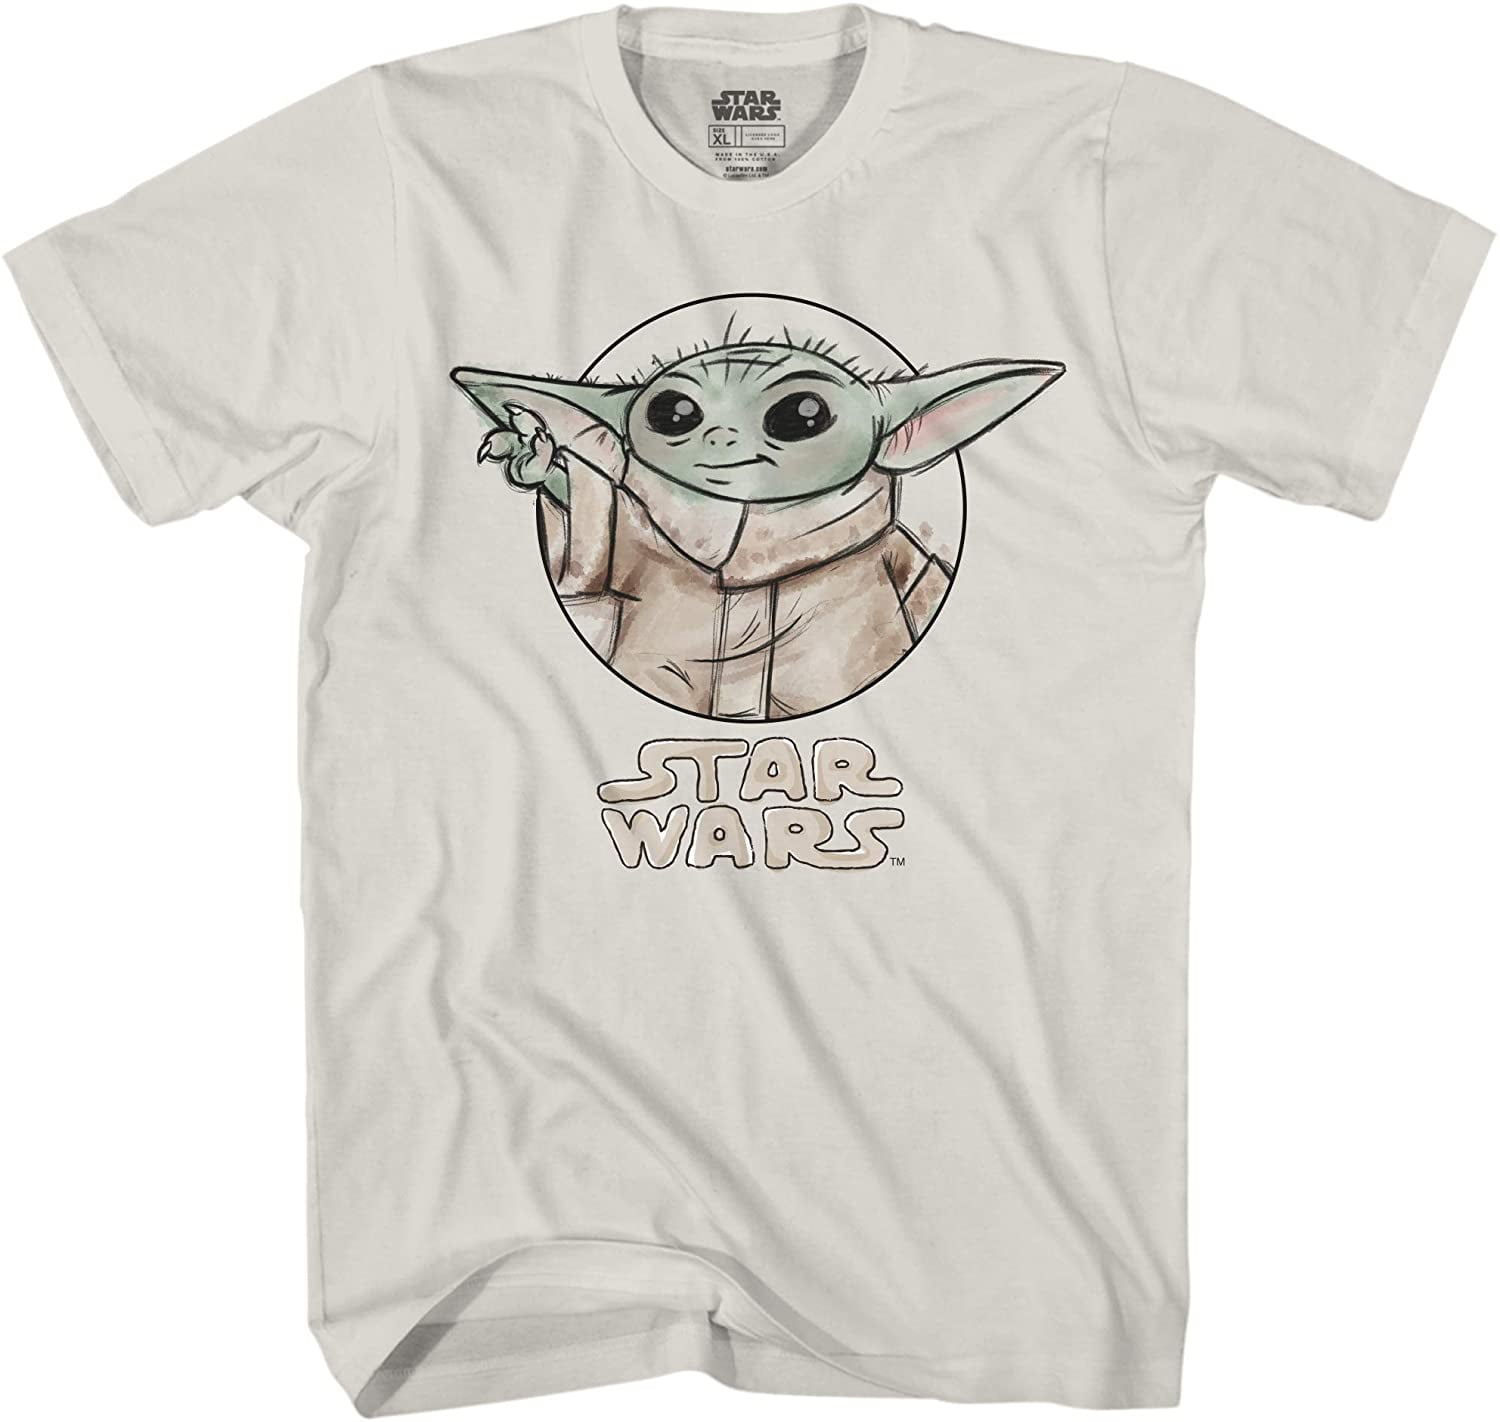 A MERRY CHRISTMAS YOU MUST HAVE Funny Star Wars Baby Yoda Gift Printed T Shirts